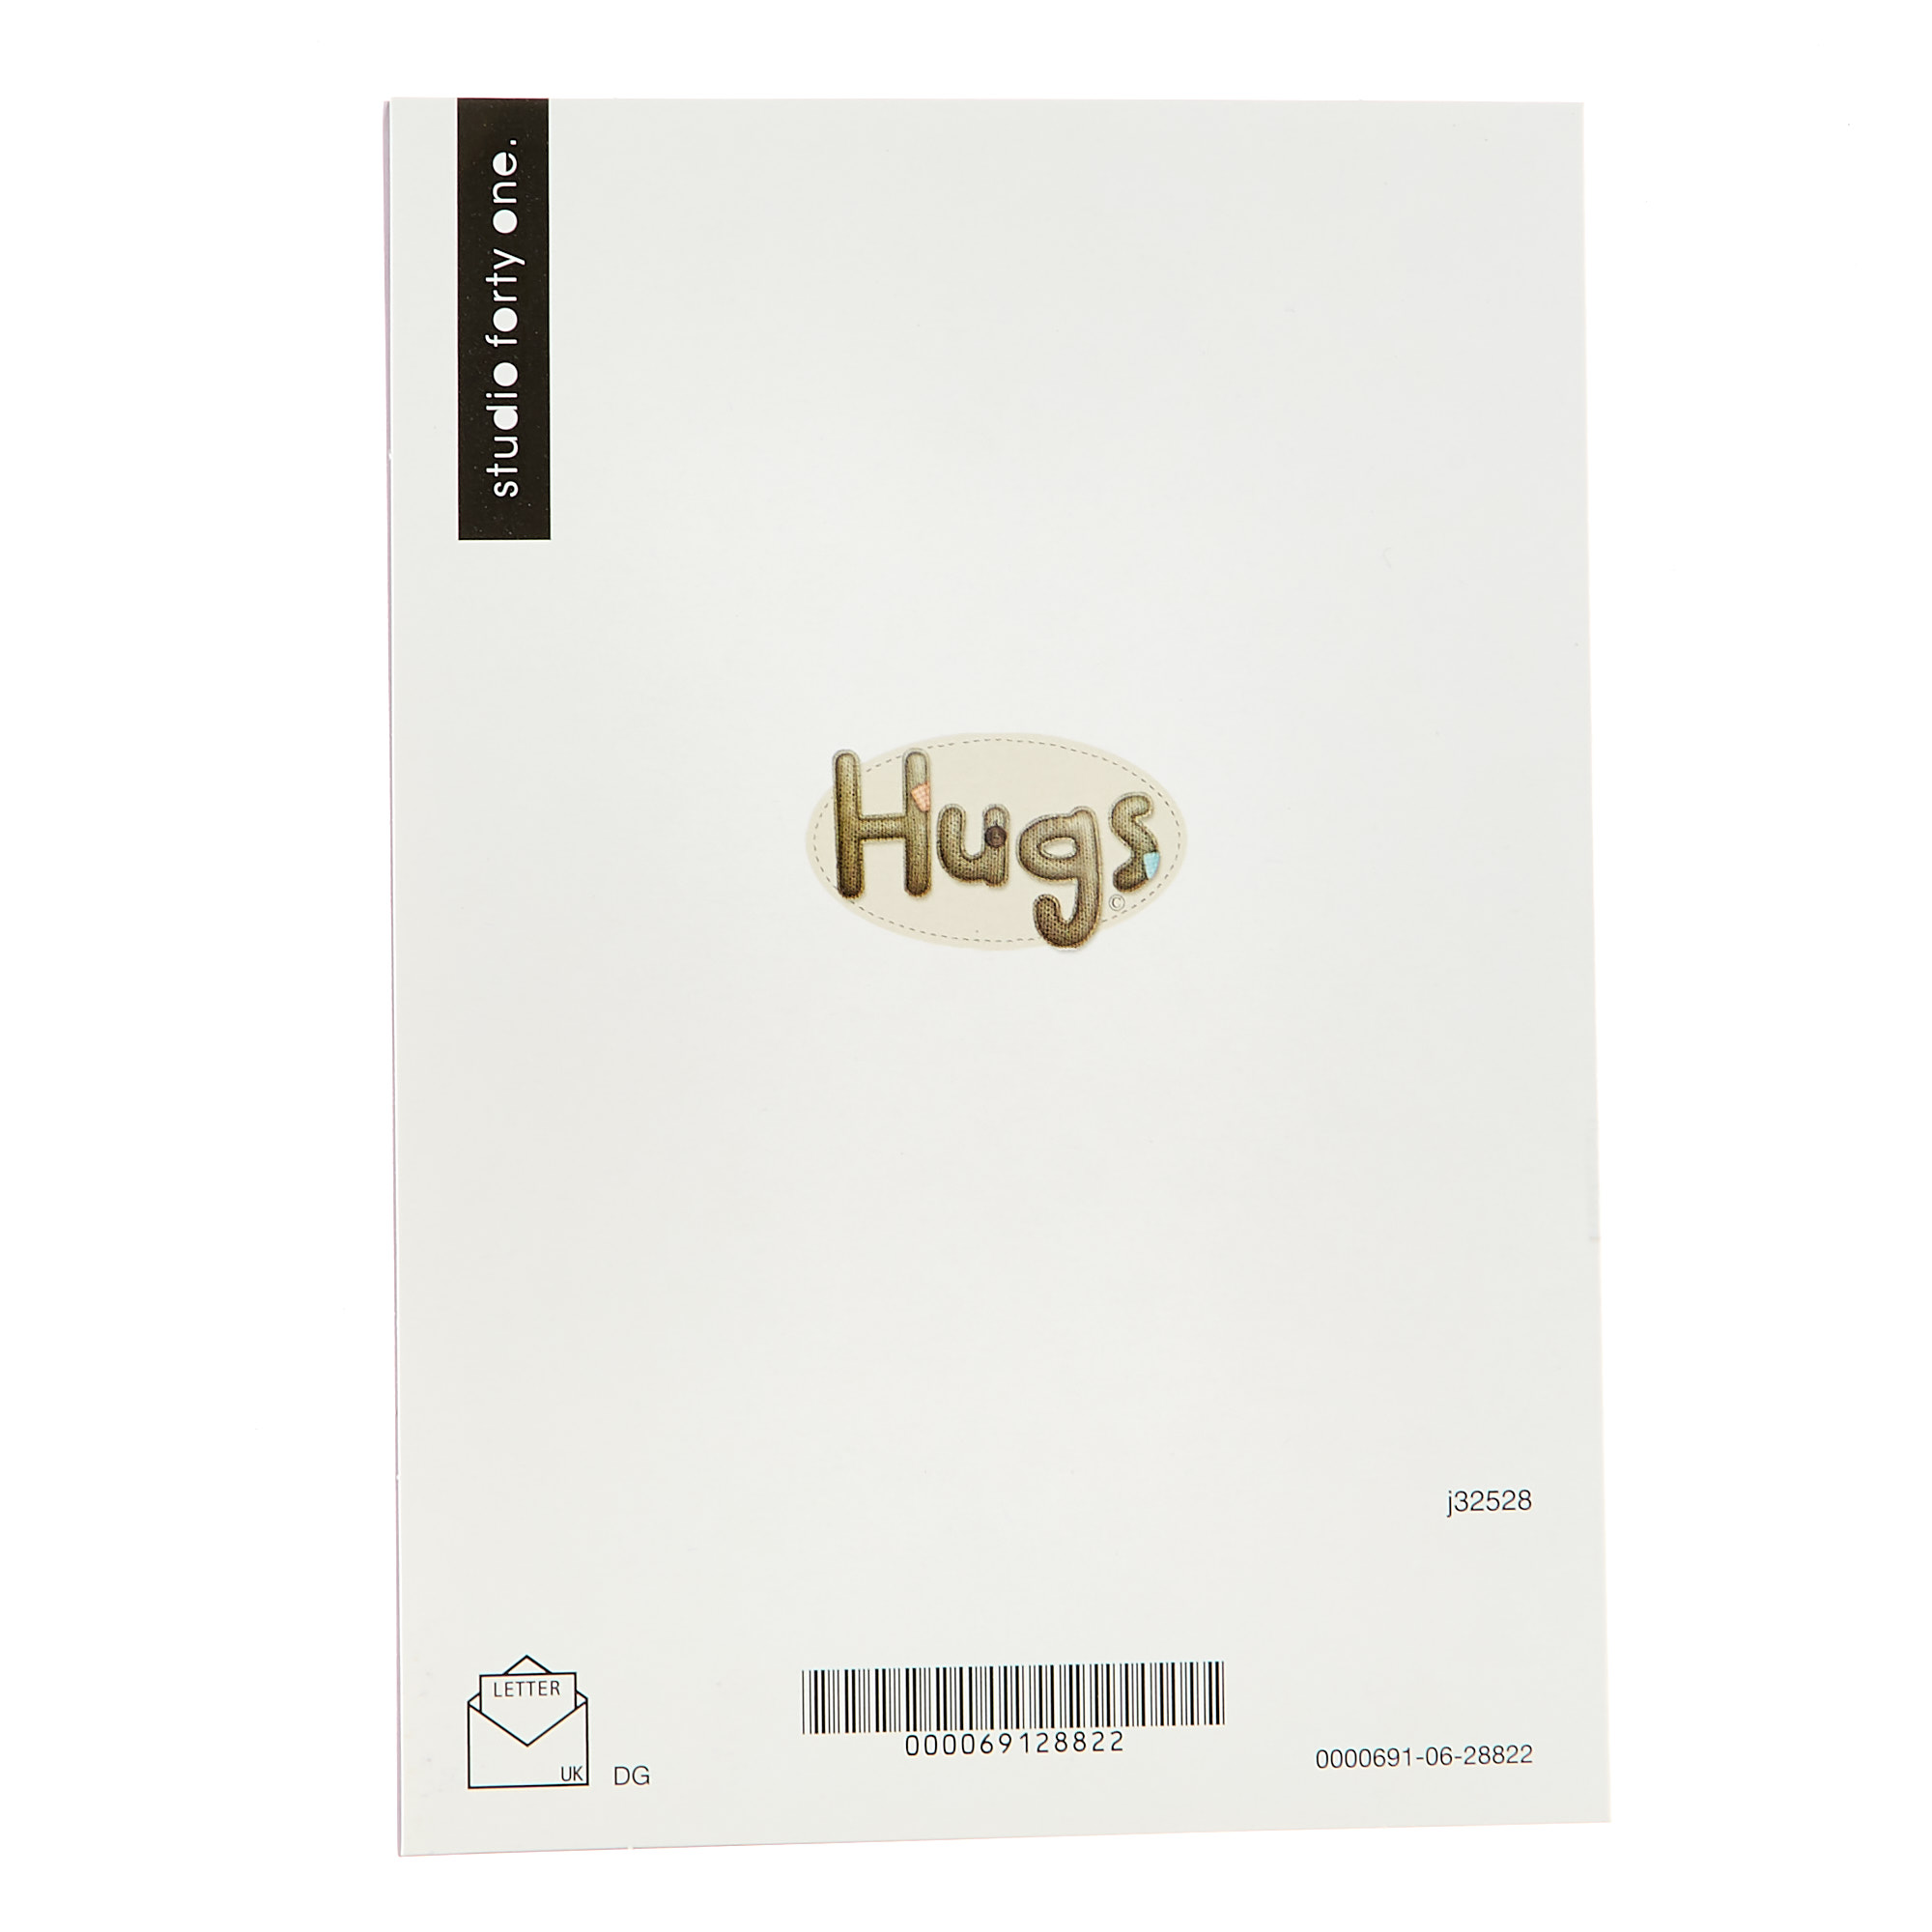 Hugs Bear Cards - Just To Say (Pack of 12)